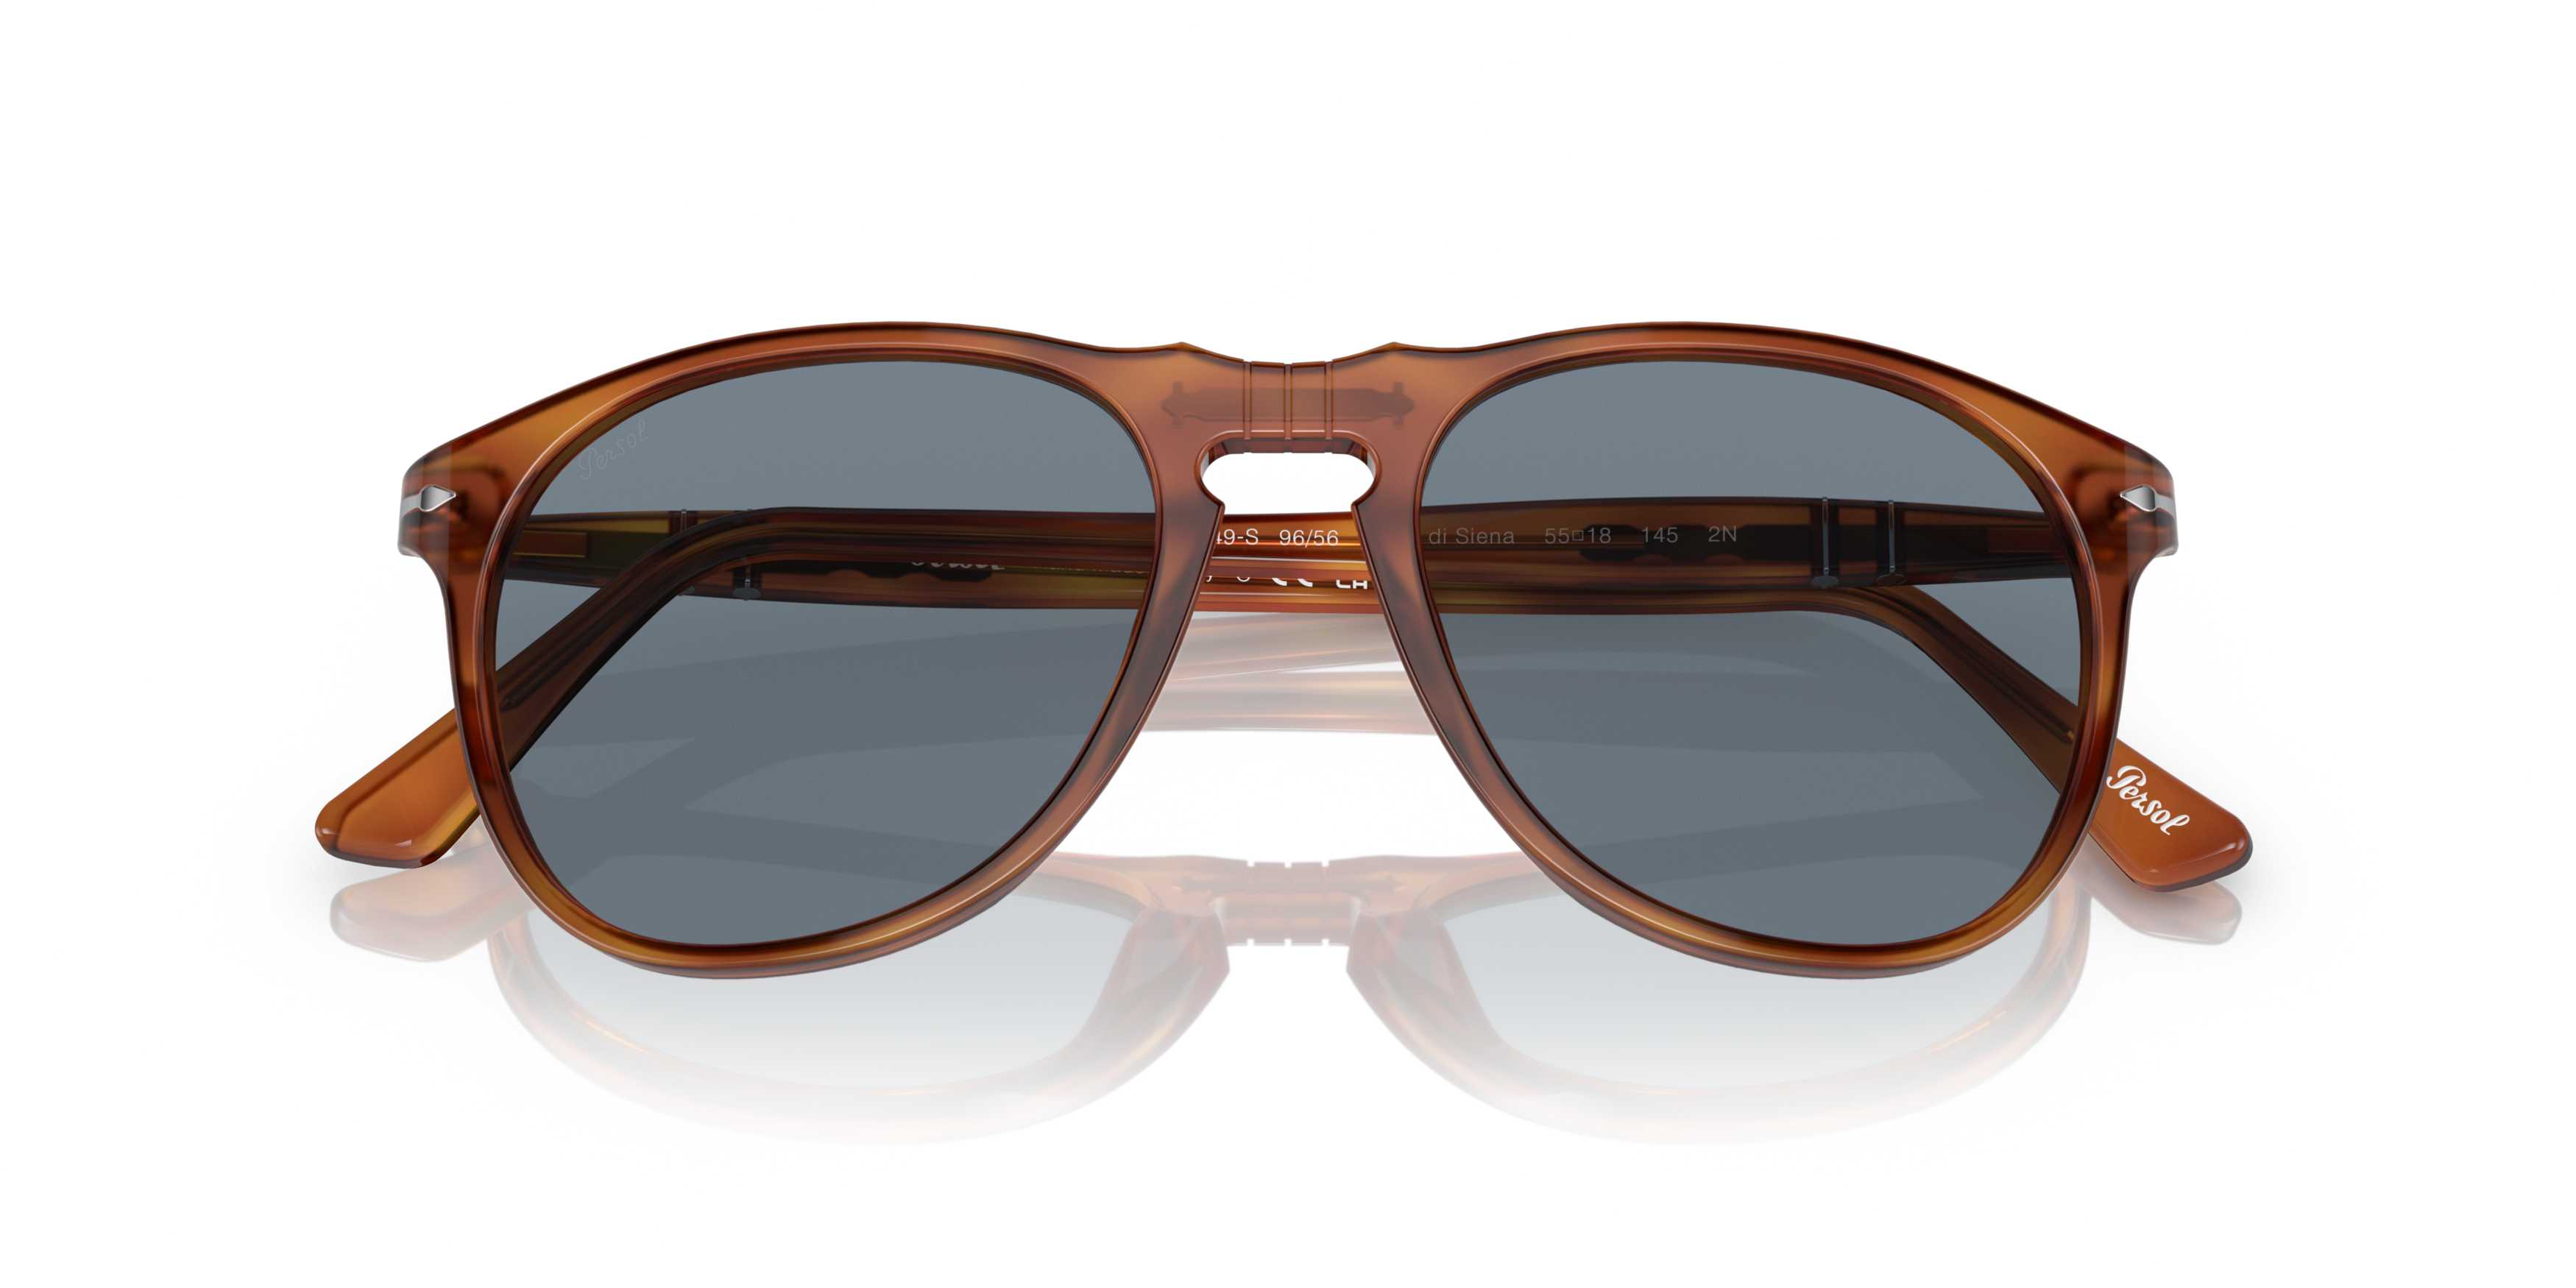 [products.image.folded] Persol 0PO9649S 96/56